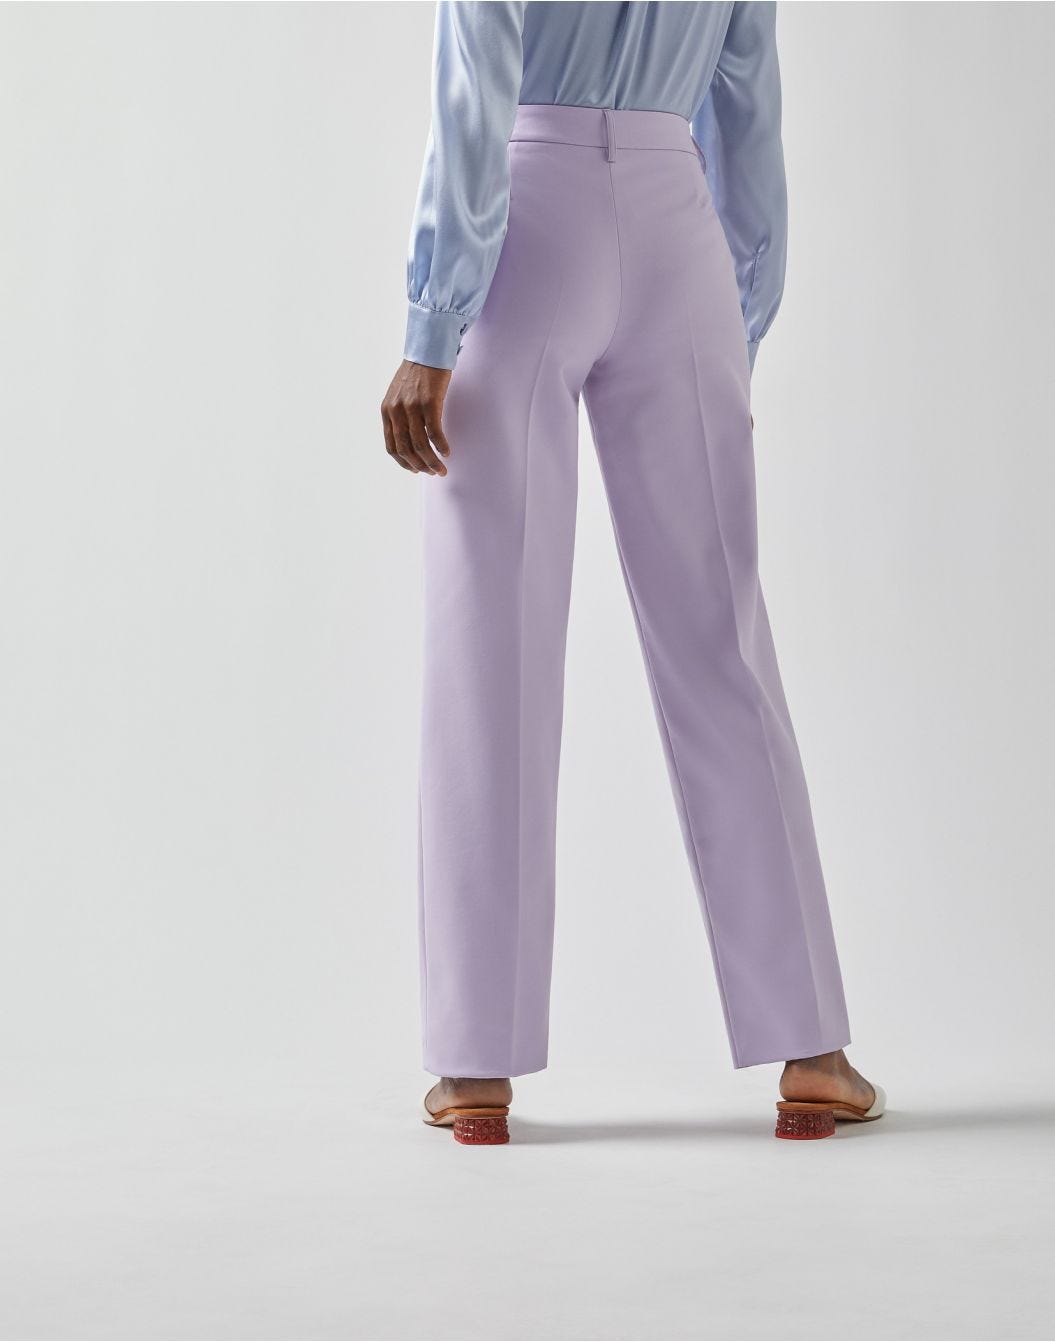 Double stretch cotton trousers